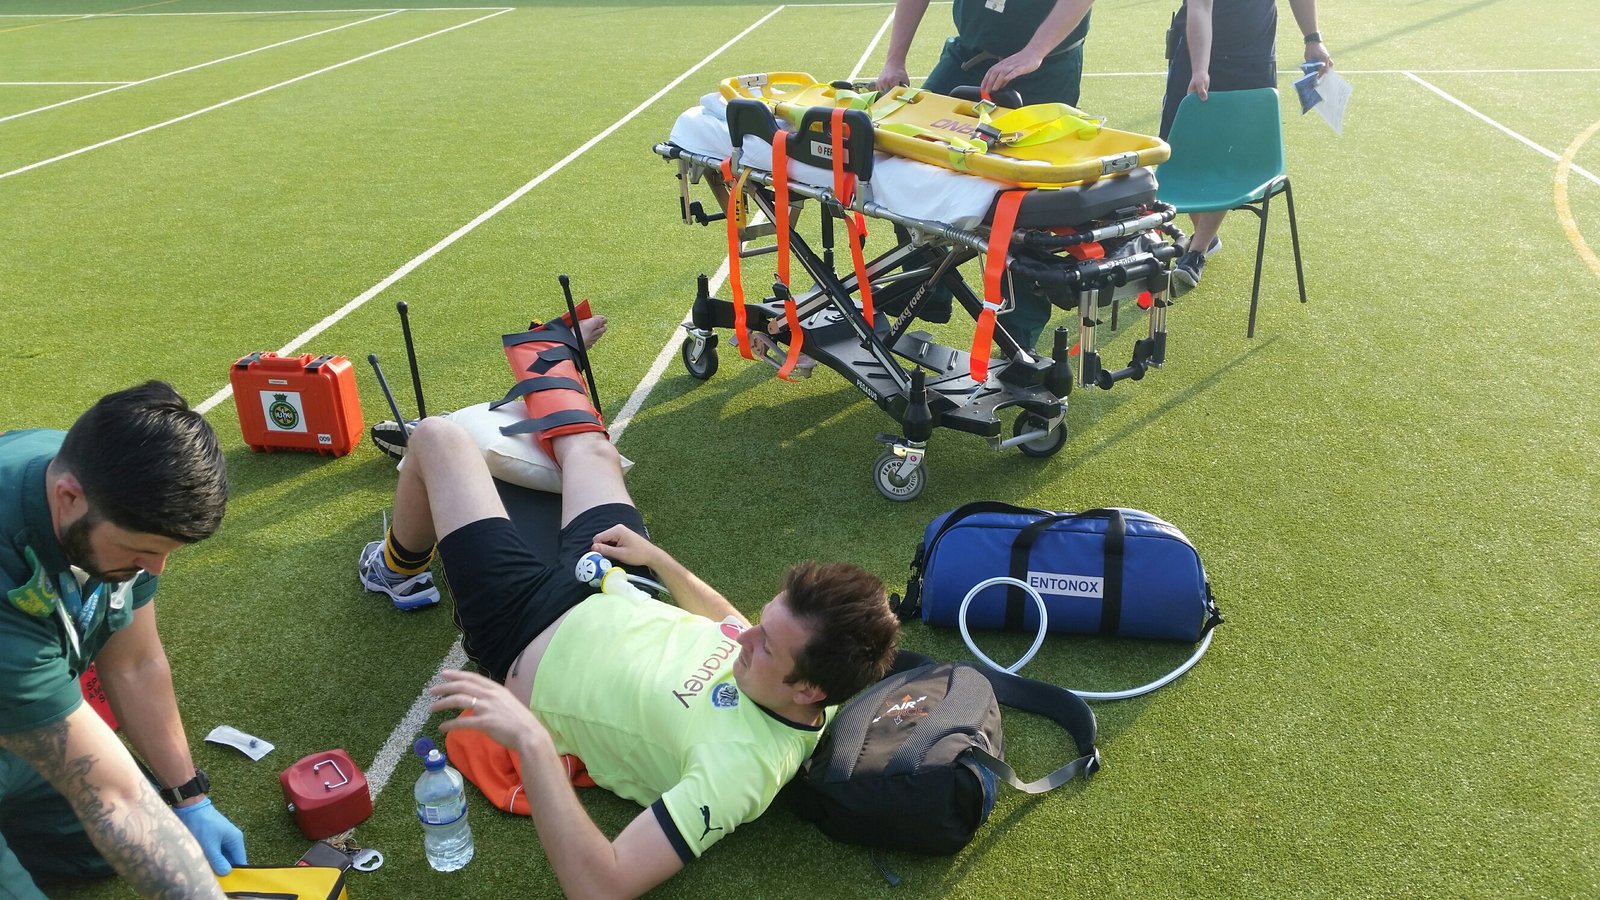 Tim with broken ankle on the football field